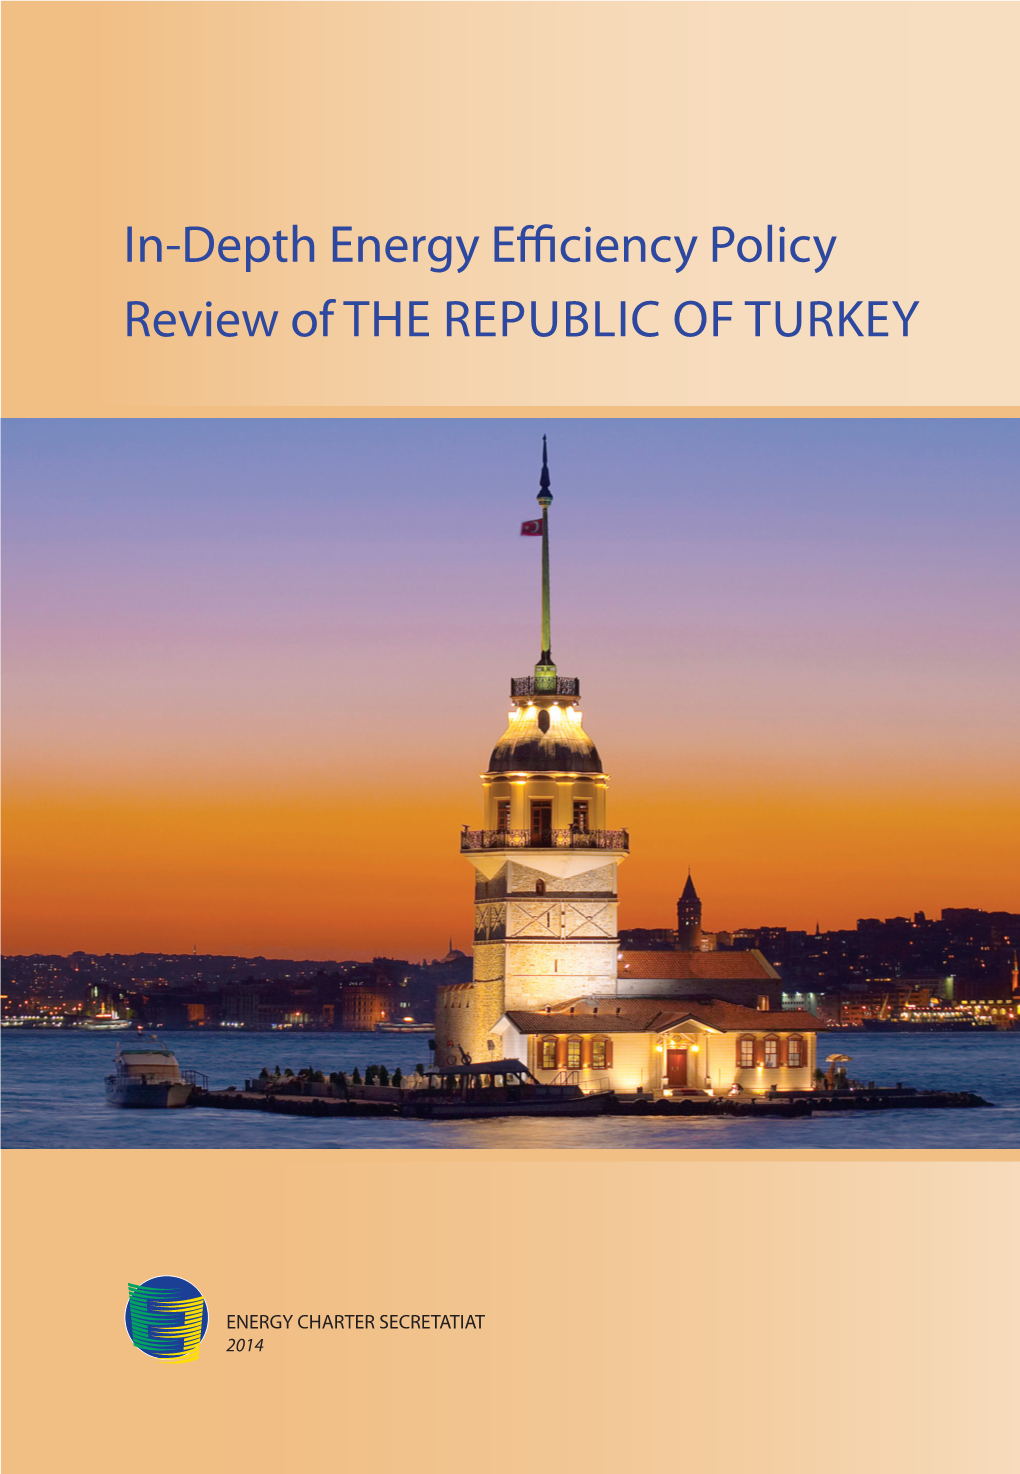 In-Depth Energy Efficiency Policy Review of the REPUBLIC of TURKEY